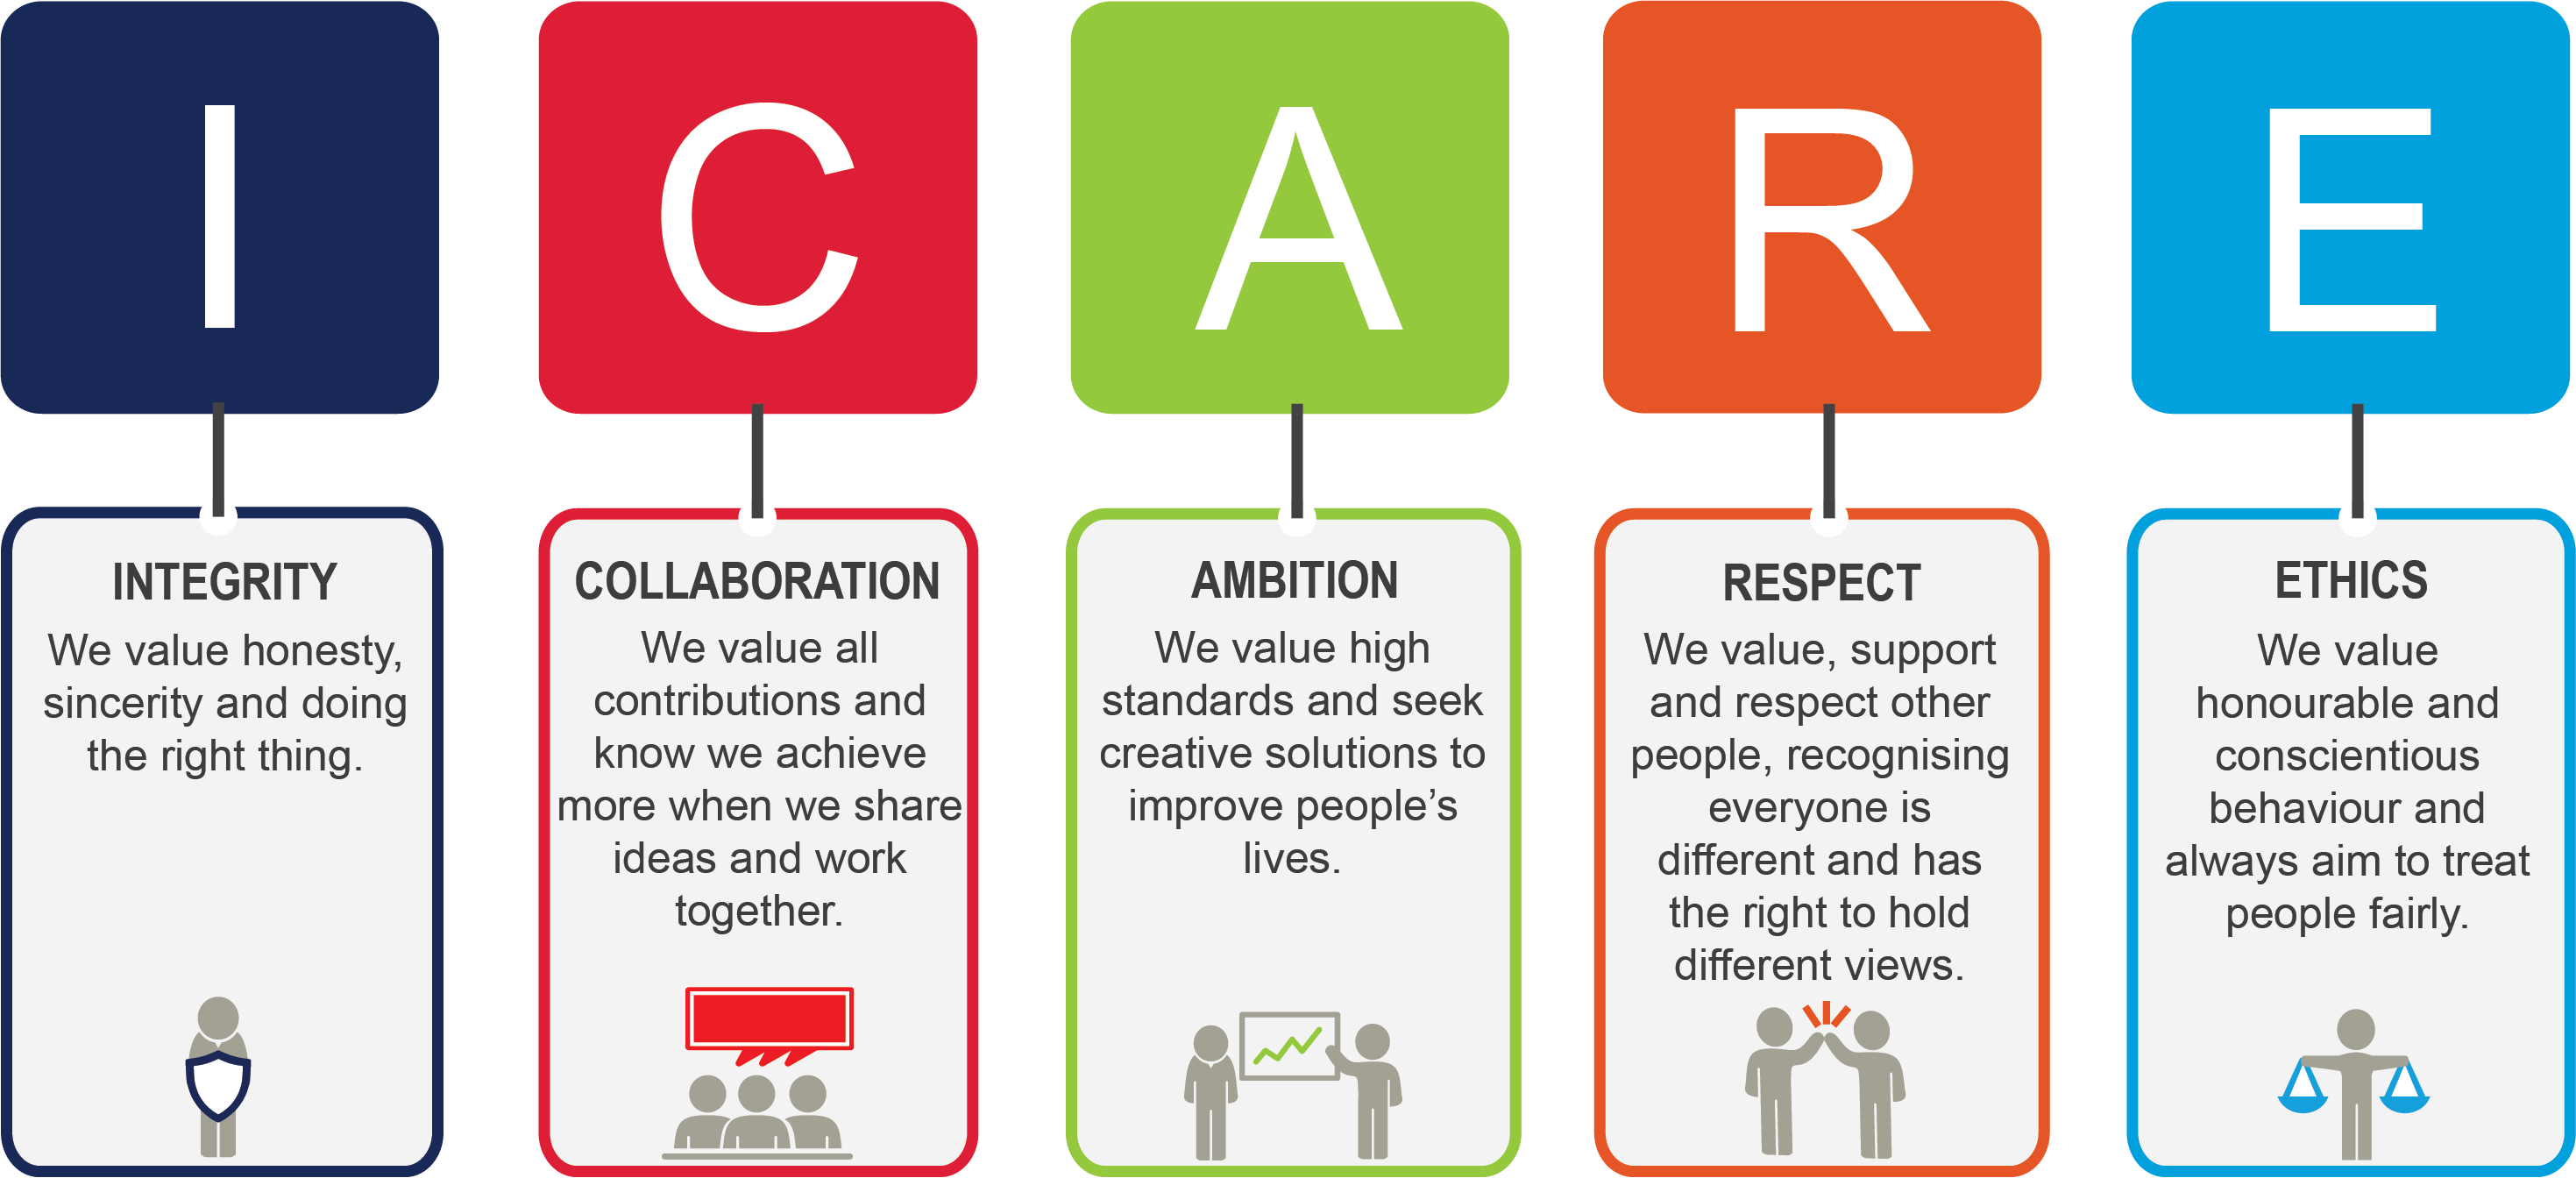 Values - ICARE